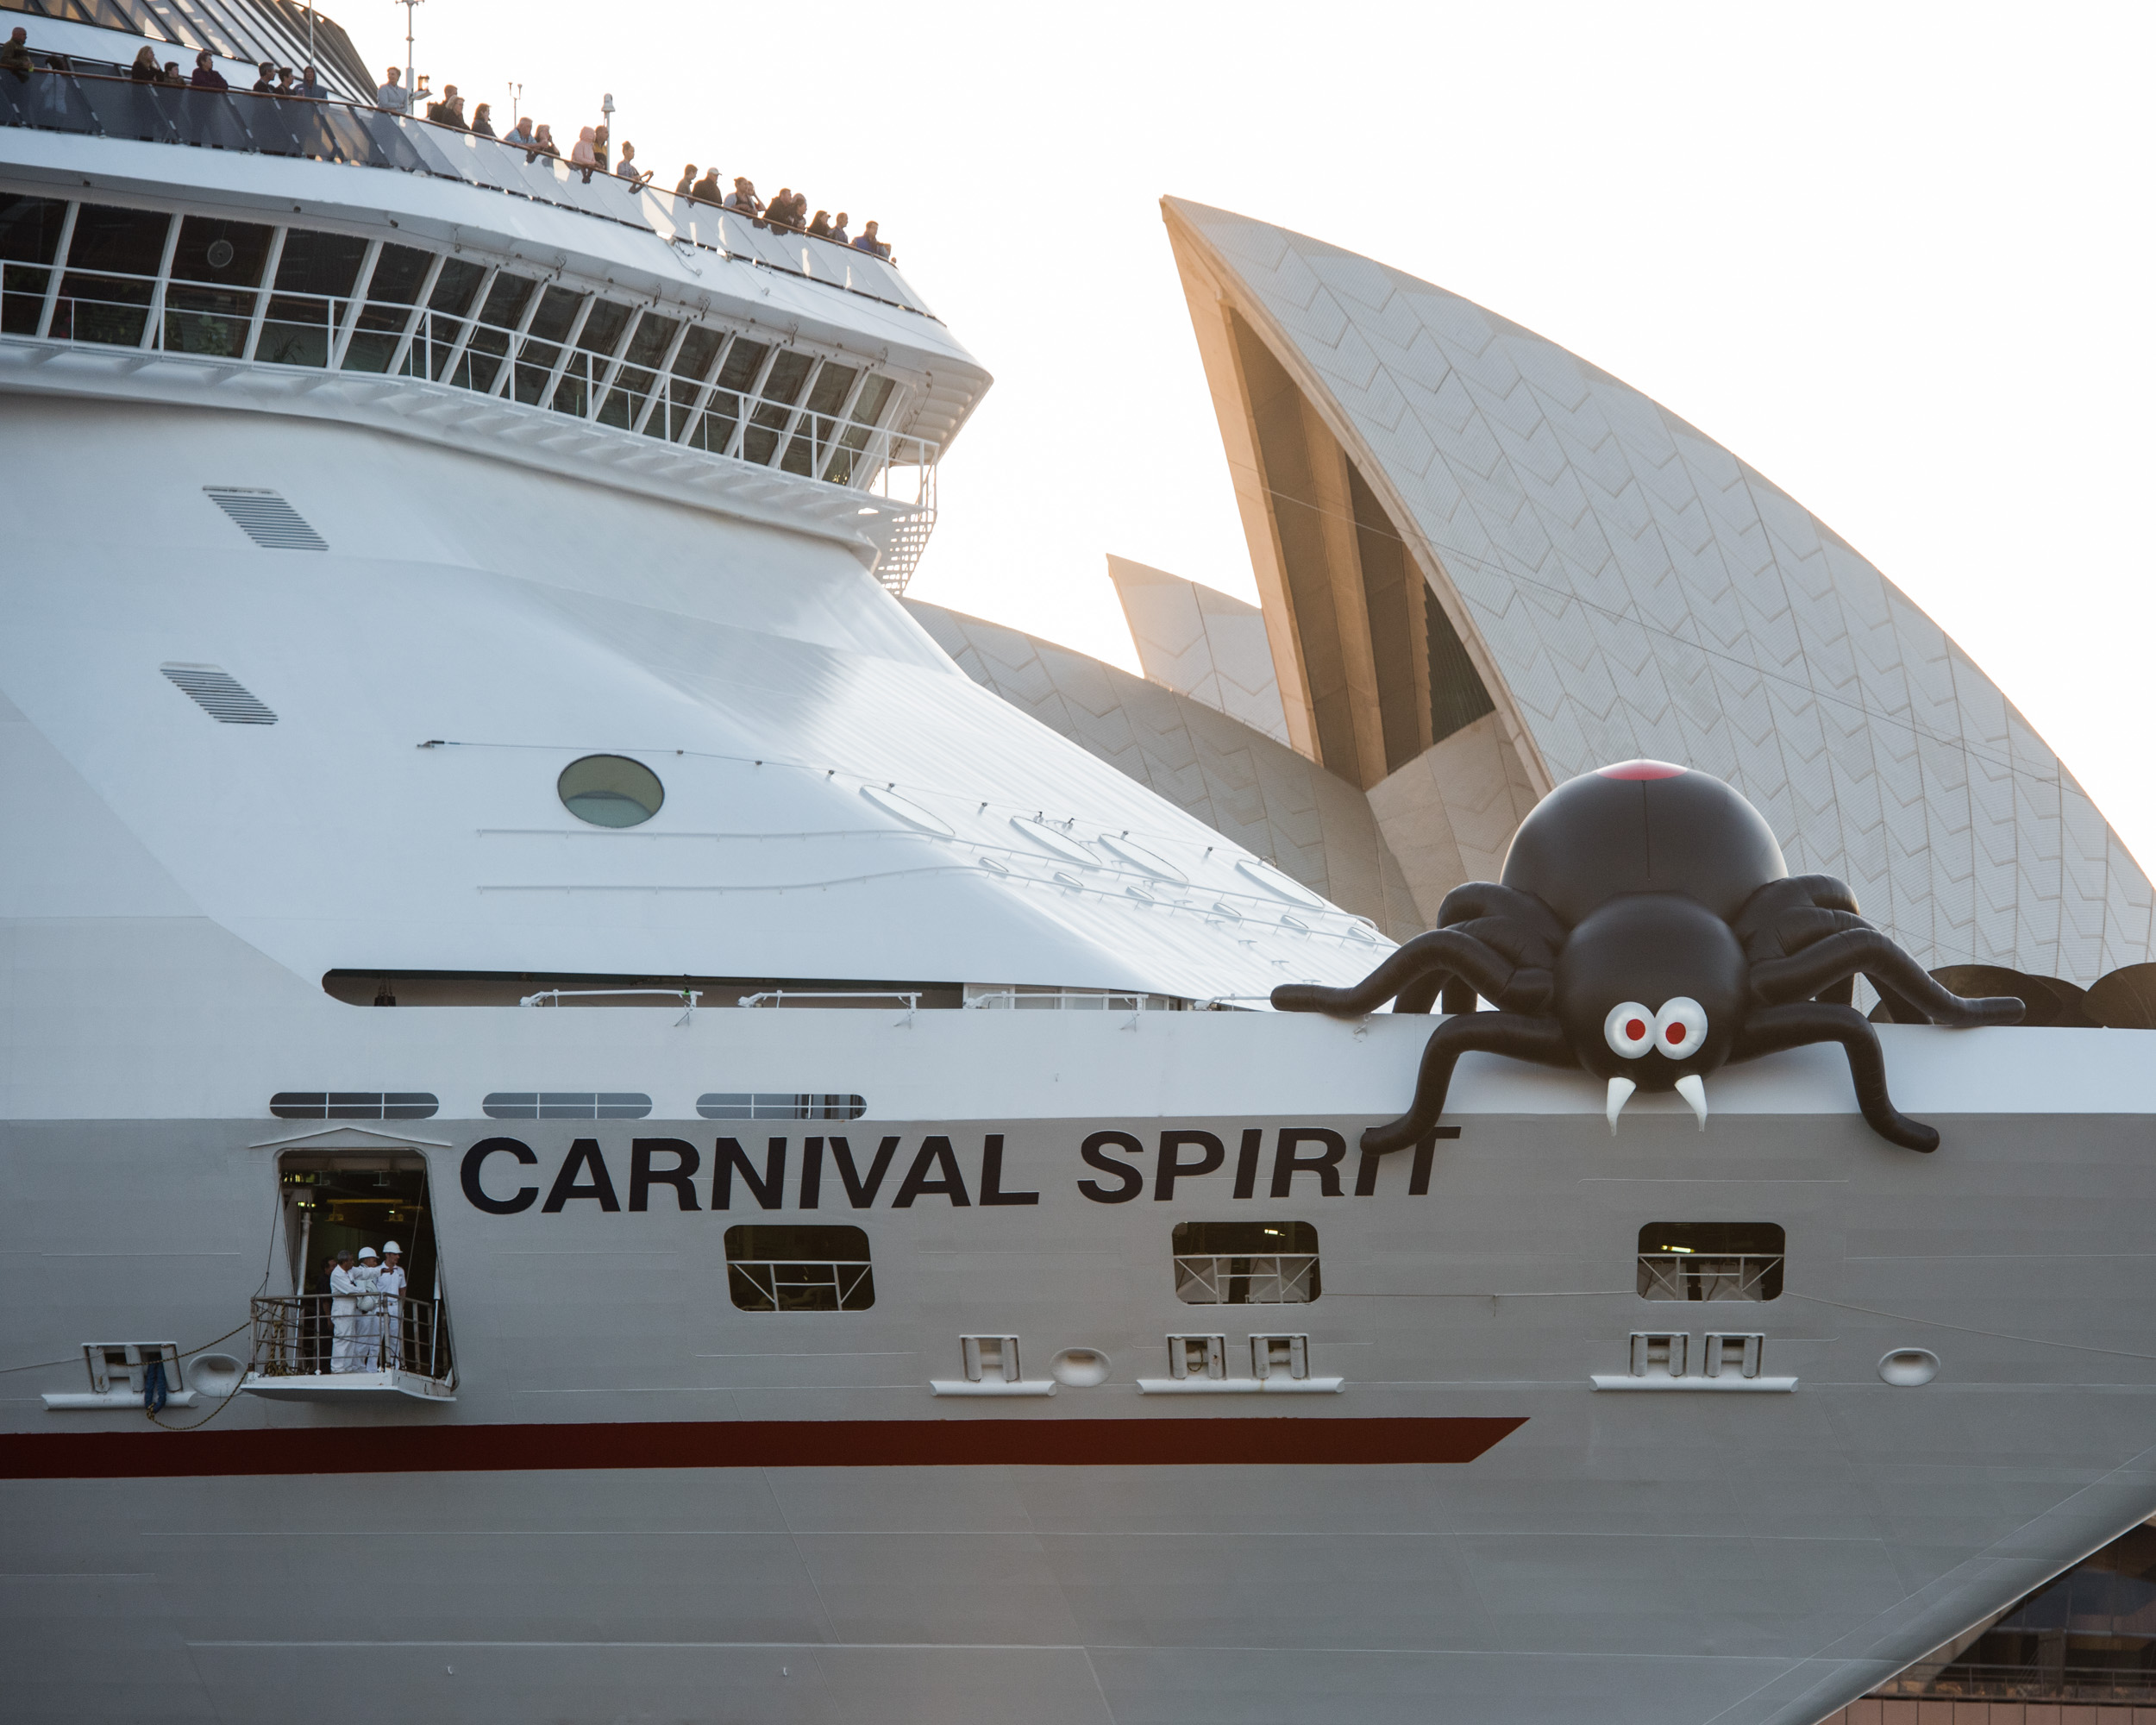 Carnival Spirit creeps into Sydney with a giant Redback 13